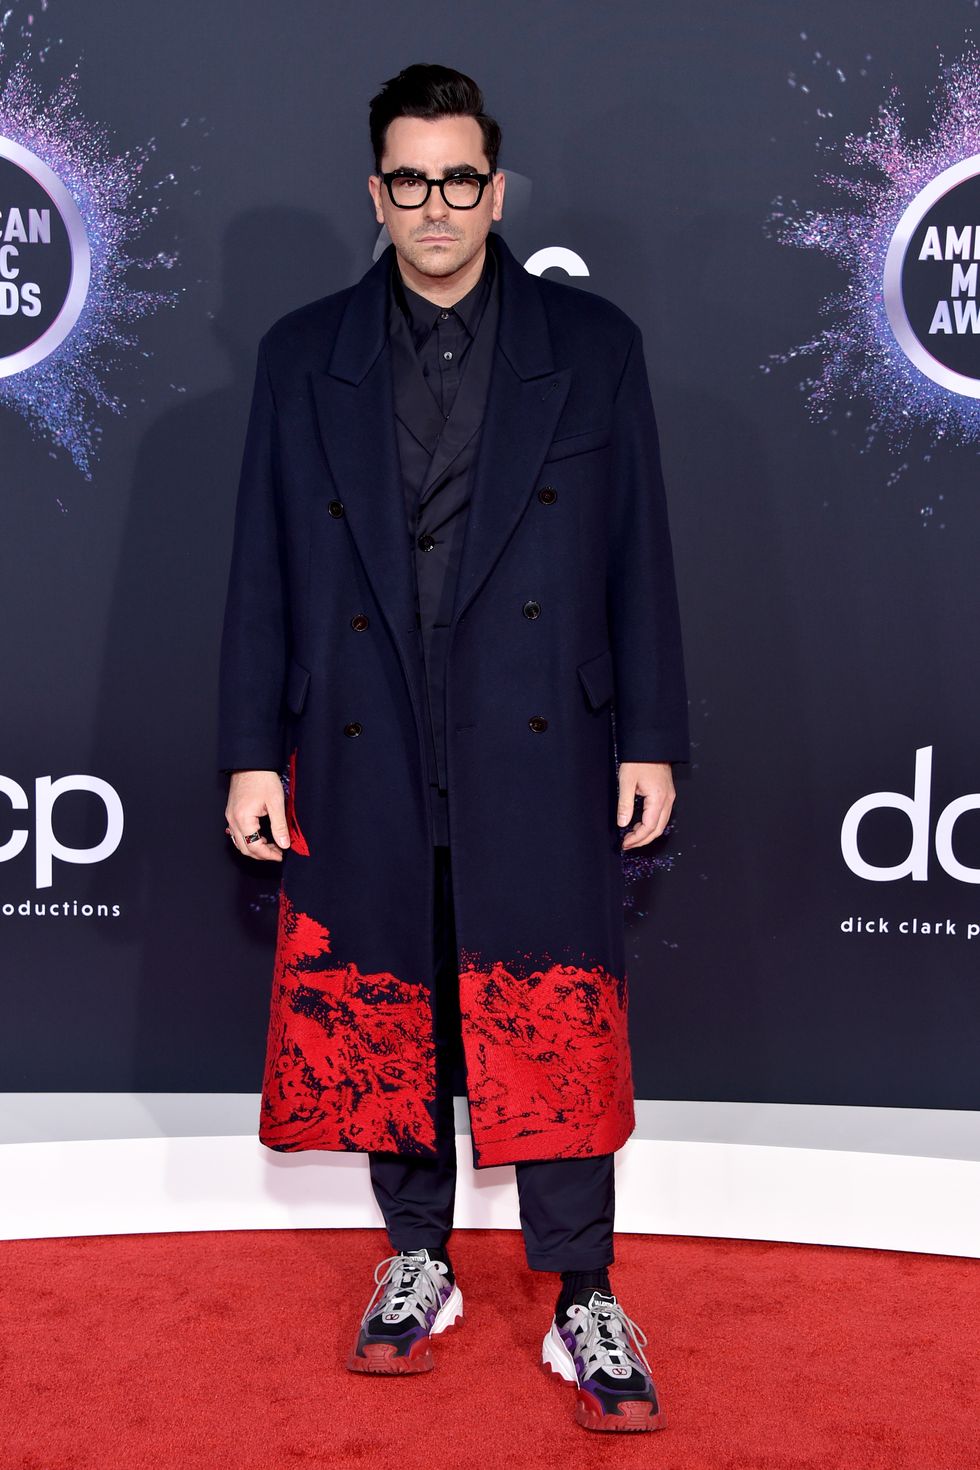 Dan Levy at the 2019 American Music Awards - Arrivals